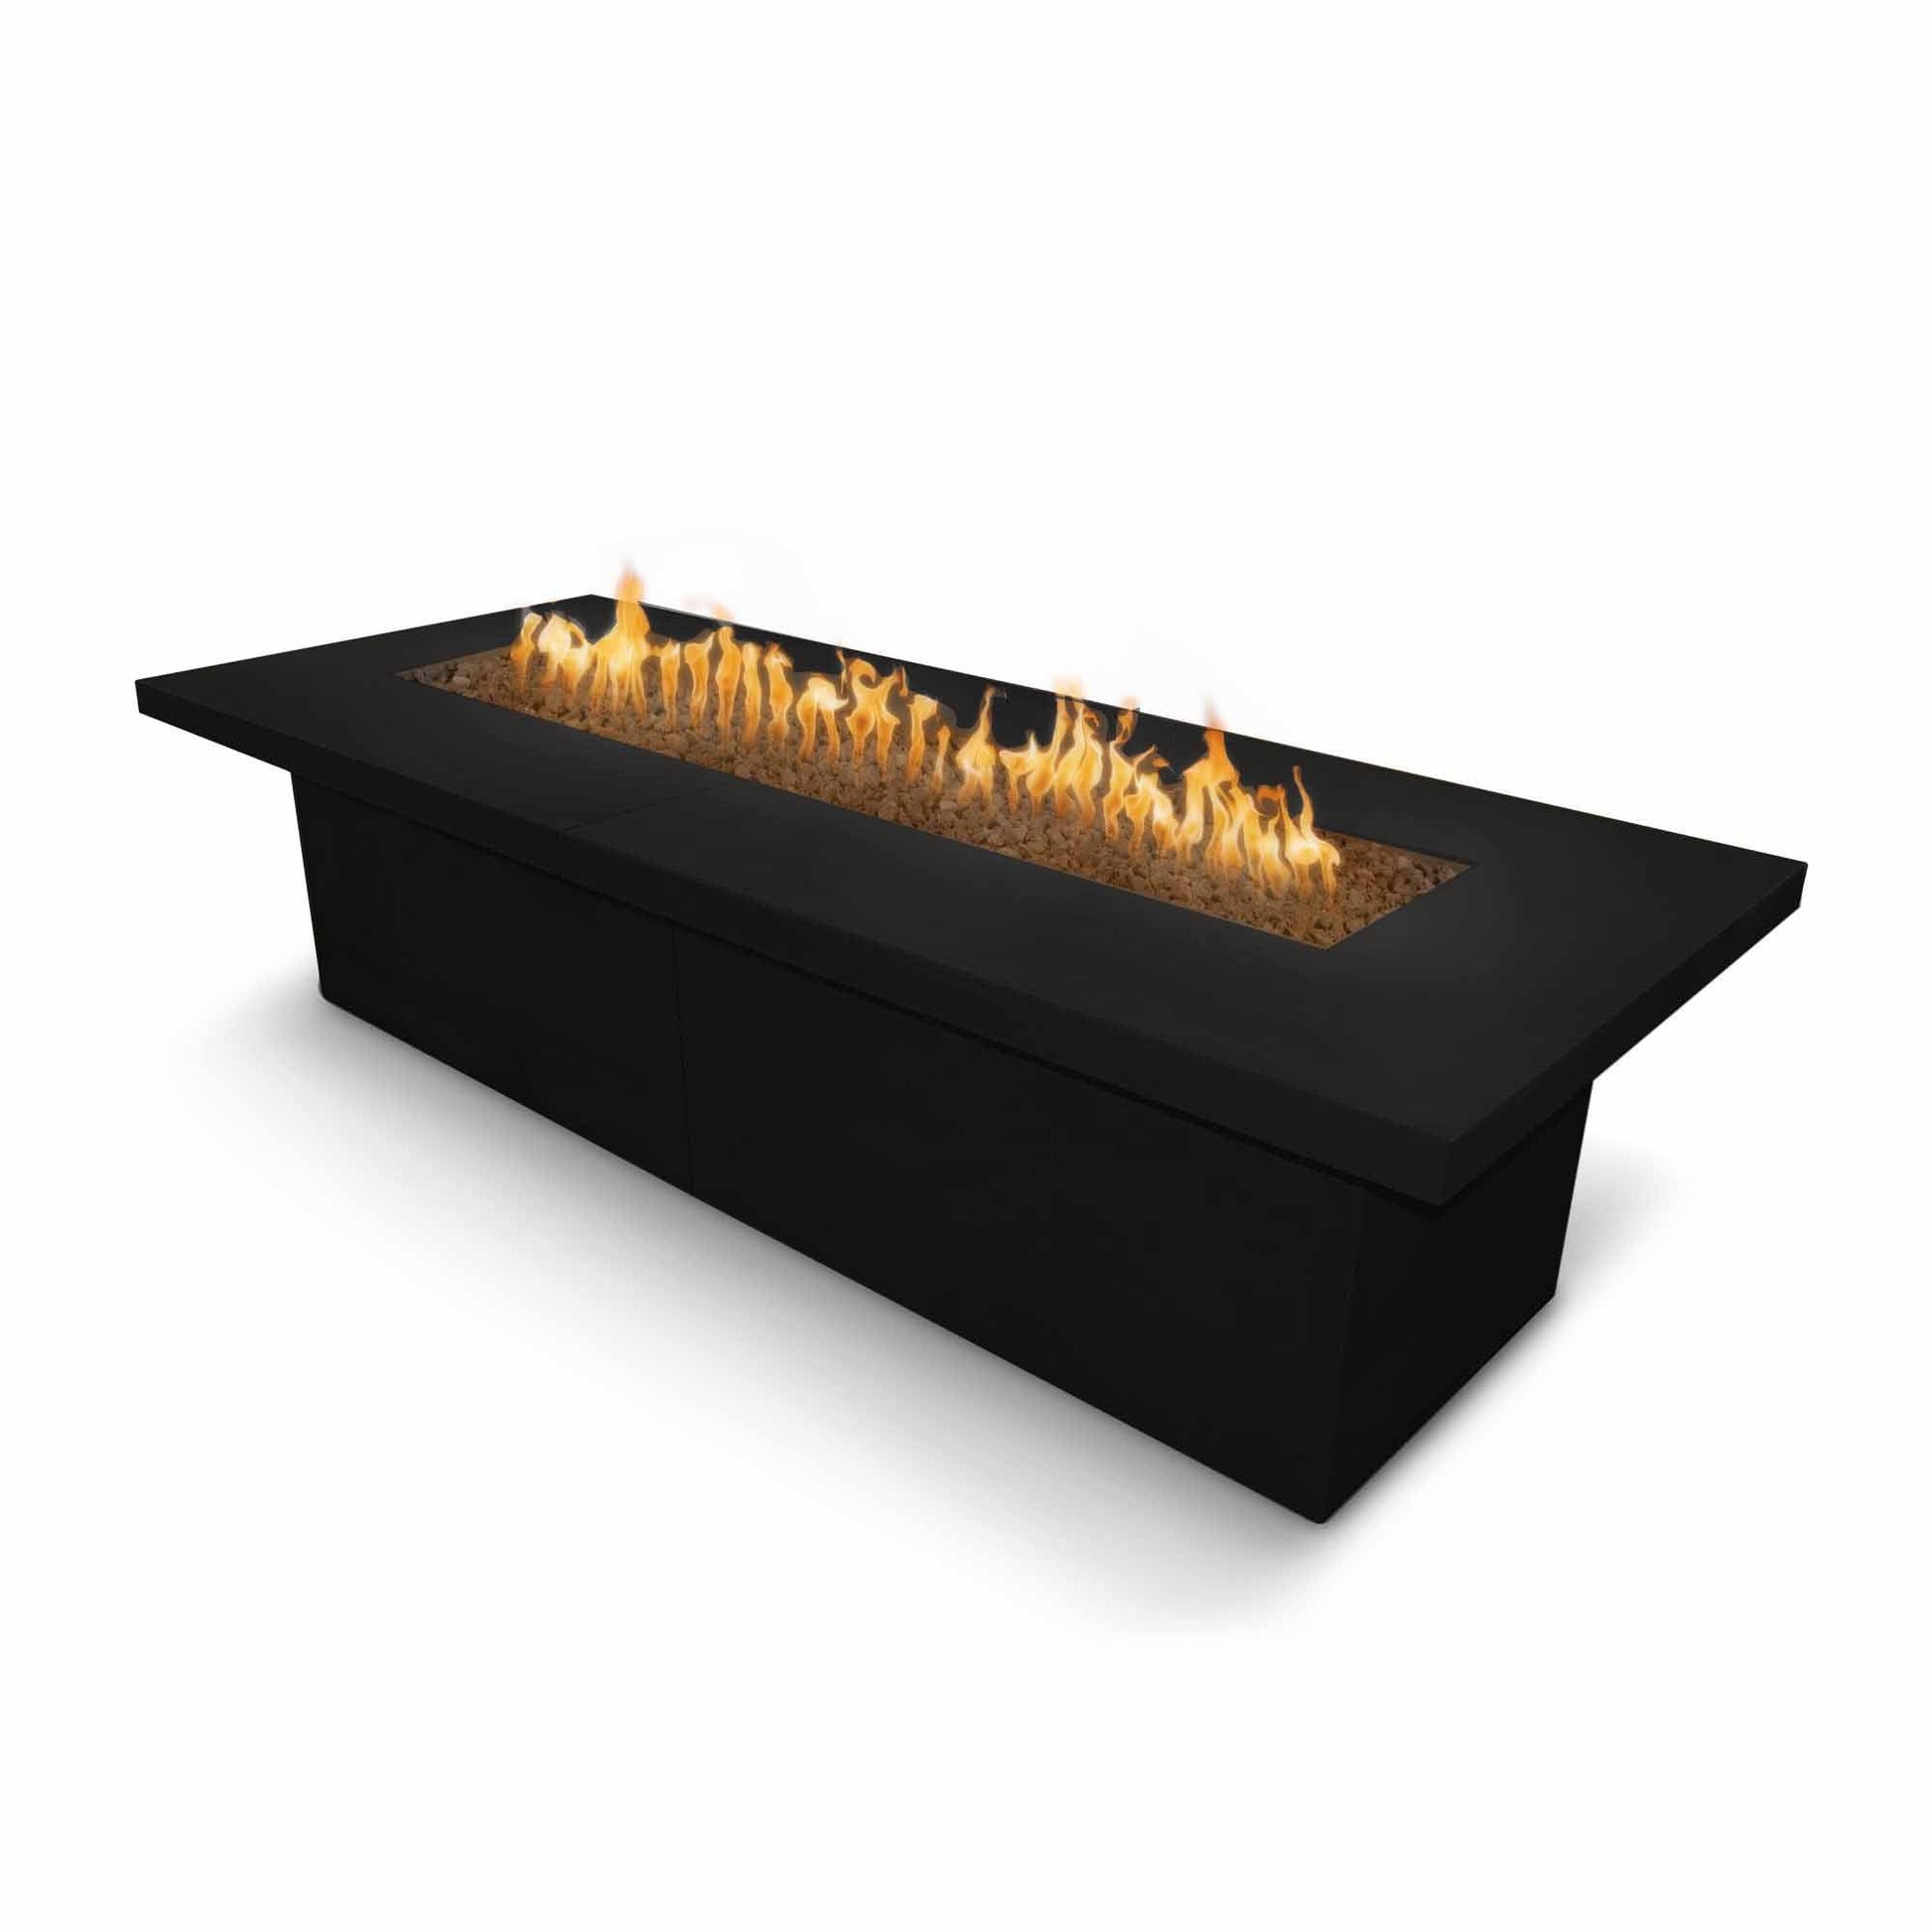 The Outdoor Plus Rectangular Newport 72" Gray Powder Coated Metal Liquid Propane Fire Pit with 110V Electronic Ignition